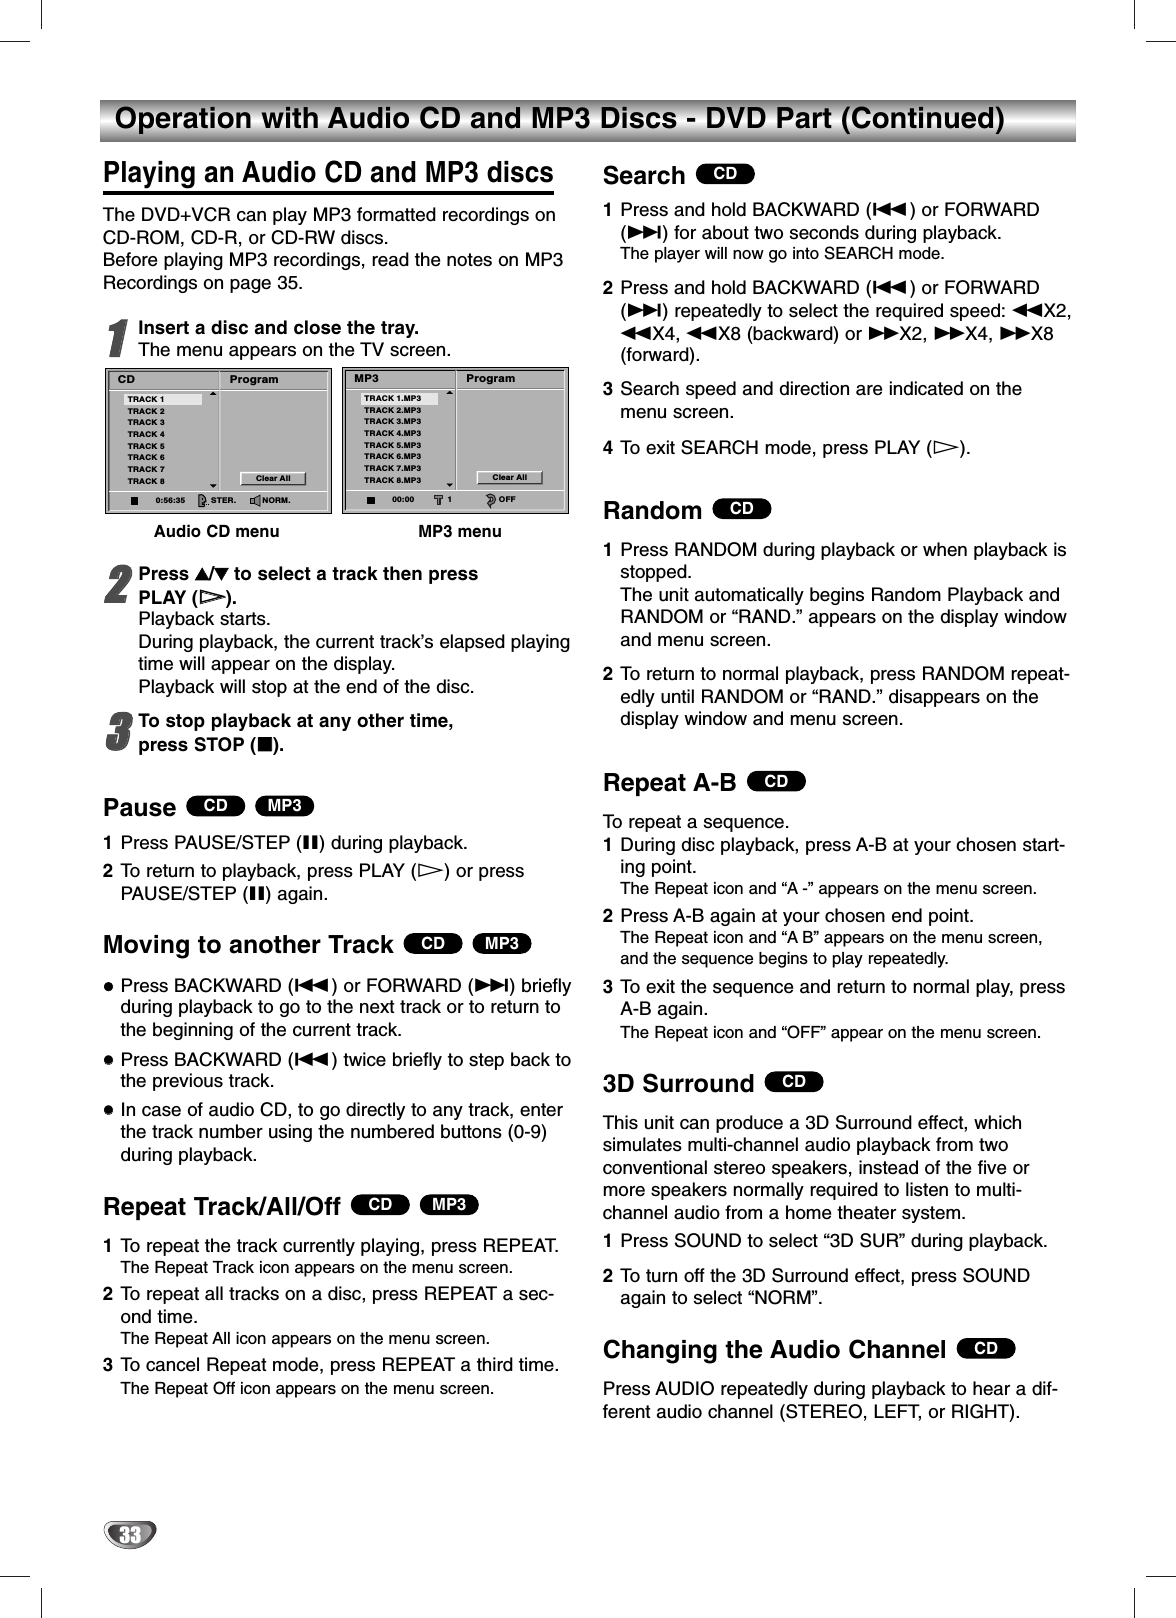 33Operation with Audio CD and MP3 Discs - DVD Part (Continued)Playing an Audio CD and MP3 discsThe DVD+VCR can play MP3 formatted recordings onCD-ROM, CD-R, or CD-RW discs.Before playing MP3 recordings, read the notes on MP3Recordings on page 35.11Insert a disc and close the tray.The menu appears on the TV screen.Audio CD menu MP3 menu22Press 33/44to select a track then press PLAY (HH). Playback starts. During playback, the current track’s elapsed playingtime will appear on the display.Playback will stop at the end of the disc.33To stop playback at any other time, press STOP (xx).Pause 1Press PAUSE/STEP (X) during playback.2To return to playback, press PLAY (H) or pressPAUSE/STEP (X) again.Moving to another Track Press BACKWARD (.) or FORWARD (&gt;) brieflyduring playback to go to the next track or to return tothe beginning of the current track.Press BACKWARD (.) twice briefly to step back tothe previous track.In case of audio CD, to go directly to any track, enterthe track number using the numbered buttons (0-9)during playback.Repeat Track/All/Off 1To repeat the track currently playing, press REPEAT.The Repeat Track icon appears on the menu screen.2To repeat all tracks on a disc, press REPEAT a sec-ond time.The Repeat All icon appears on the menu screen.3To cancel Repeat mode, press REPEAT a third time.The Repeat Off icon appears on the menu screen.Search 1Press and hold BACKWARD (.) or FORWARD(&gt;) for about two seconds during playback.The player will now go into SEARCH mode. 2Press and hold BACKWARD (.) or FORWARD(&gt;) repeatedly to select the required speed: mX2,mX4, mX8 (backward) or MX2, MX4, MX8(forward).3Search speed and direction are indicated on themenu screen.4To exit SEARCH mode, press PLAY (H).Random 1Press RANDOM during playback or when playback isstopped.The unit automatically begins Random Playback andRANDOM or “RAND.” appears on the display windowand menu screen.2To return to normal playback, press RANDOM repeat-edly until RANDOM or “RAND.” disappears on thedisplay window and menu screen.Repeat A-B To repeat a sequence.1During disc playback, press A-B at your chosen start-ing point.The Repeat icon and “A-” appears on the menu screen.2Press A-B again at your chosen end point.The Repeat icon and “AB” appears on the menu screen,and the sequence begins to play repeatedly.3To exit the sequence and return to normal play, pressA-B again.The Repeat icon and “OFF” appear on the menu screen.3D Surround This unit can produce a 3D Surround effect, which simulates multi-channel audio playback from two conventional stereo speakers, instead of the five ormore speakers normally required to listen to multi-channel audio from a home theater system. 1Press SOUND to select “3D SUR” during playback.2To turn off the 3D Surround effect, press SOUNDagain to select “NORM”.Changing the Audio Channel Press AUDIO repeatedly during playback to hear a dif-ferent audio channel (STEREO, LEFT, or RIGHT).CDCDCDCDCDMP3CDMP3CDMP3CDProgramCDClear AllTRACK 1TRACK 2TRACK 3TRACK 4TRACK 5TRACK 6TRACK 7TRACK 80:56:35 STER. NORM.ProgramMP3Clear AllTRACK 1.MP3TRACK 2.MP3TRACK 3.MP3TRACK 4.MP3TRACK 5.MP3TRACK 6.MP3TRACK 7.MP3TRACK 8.MP300:00 1 OFF